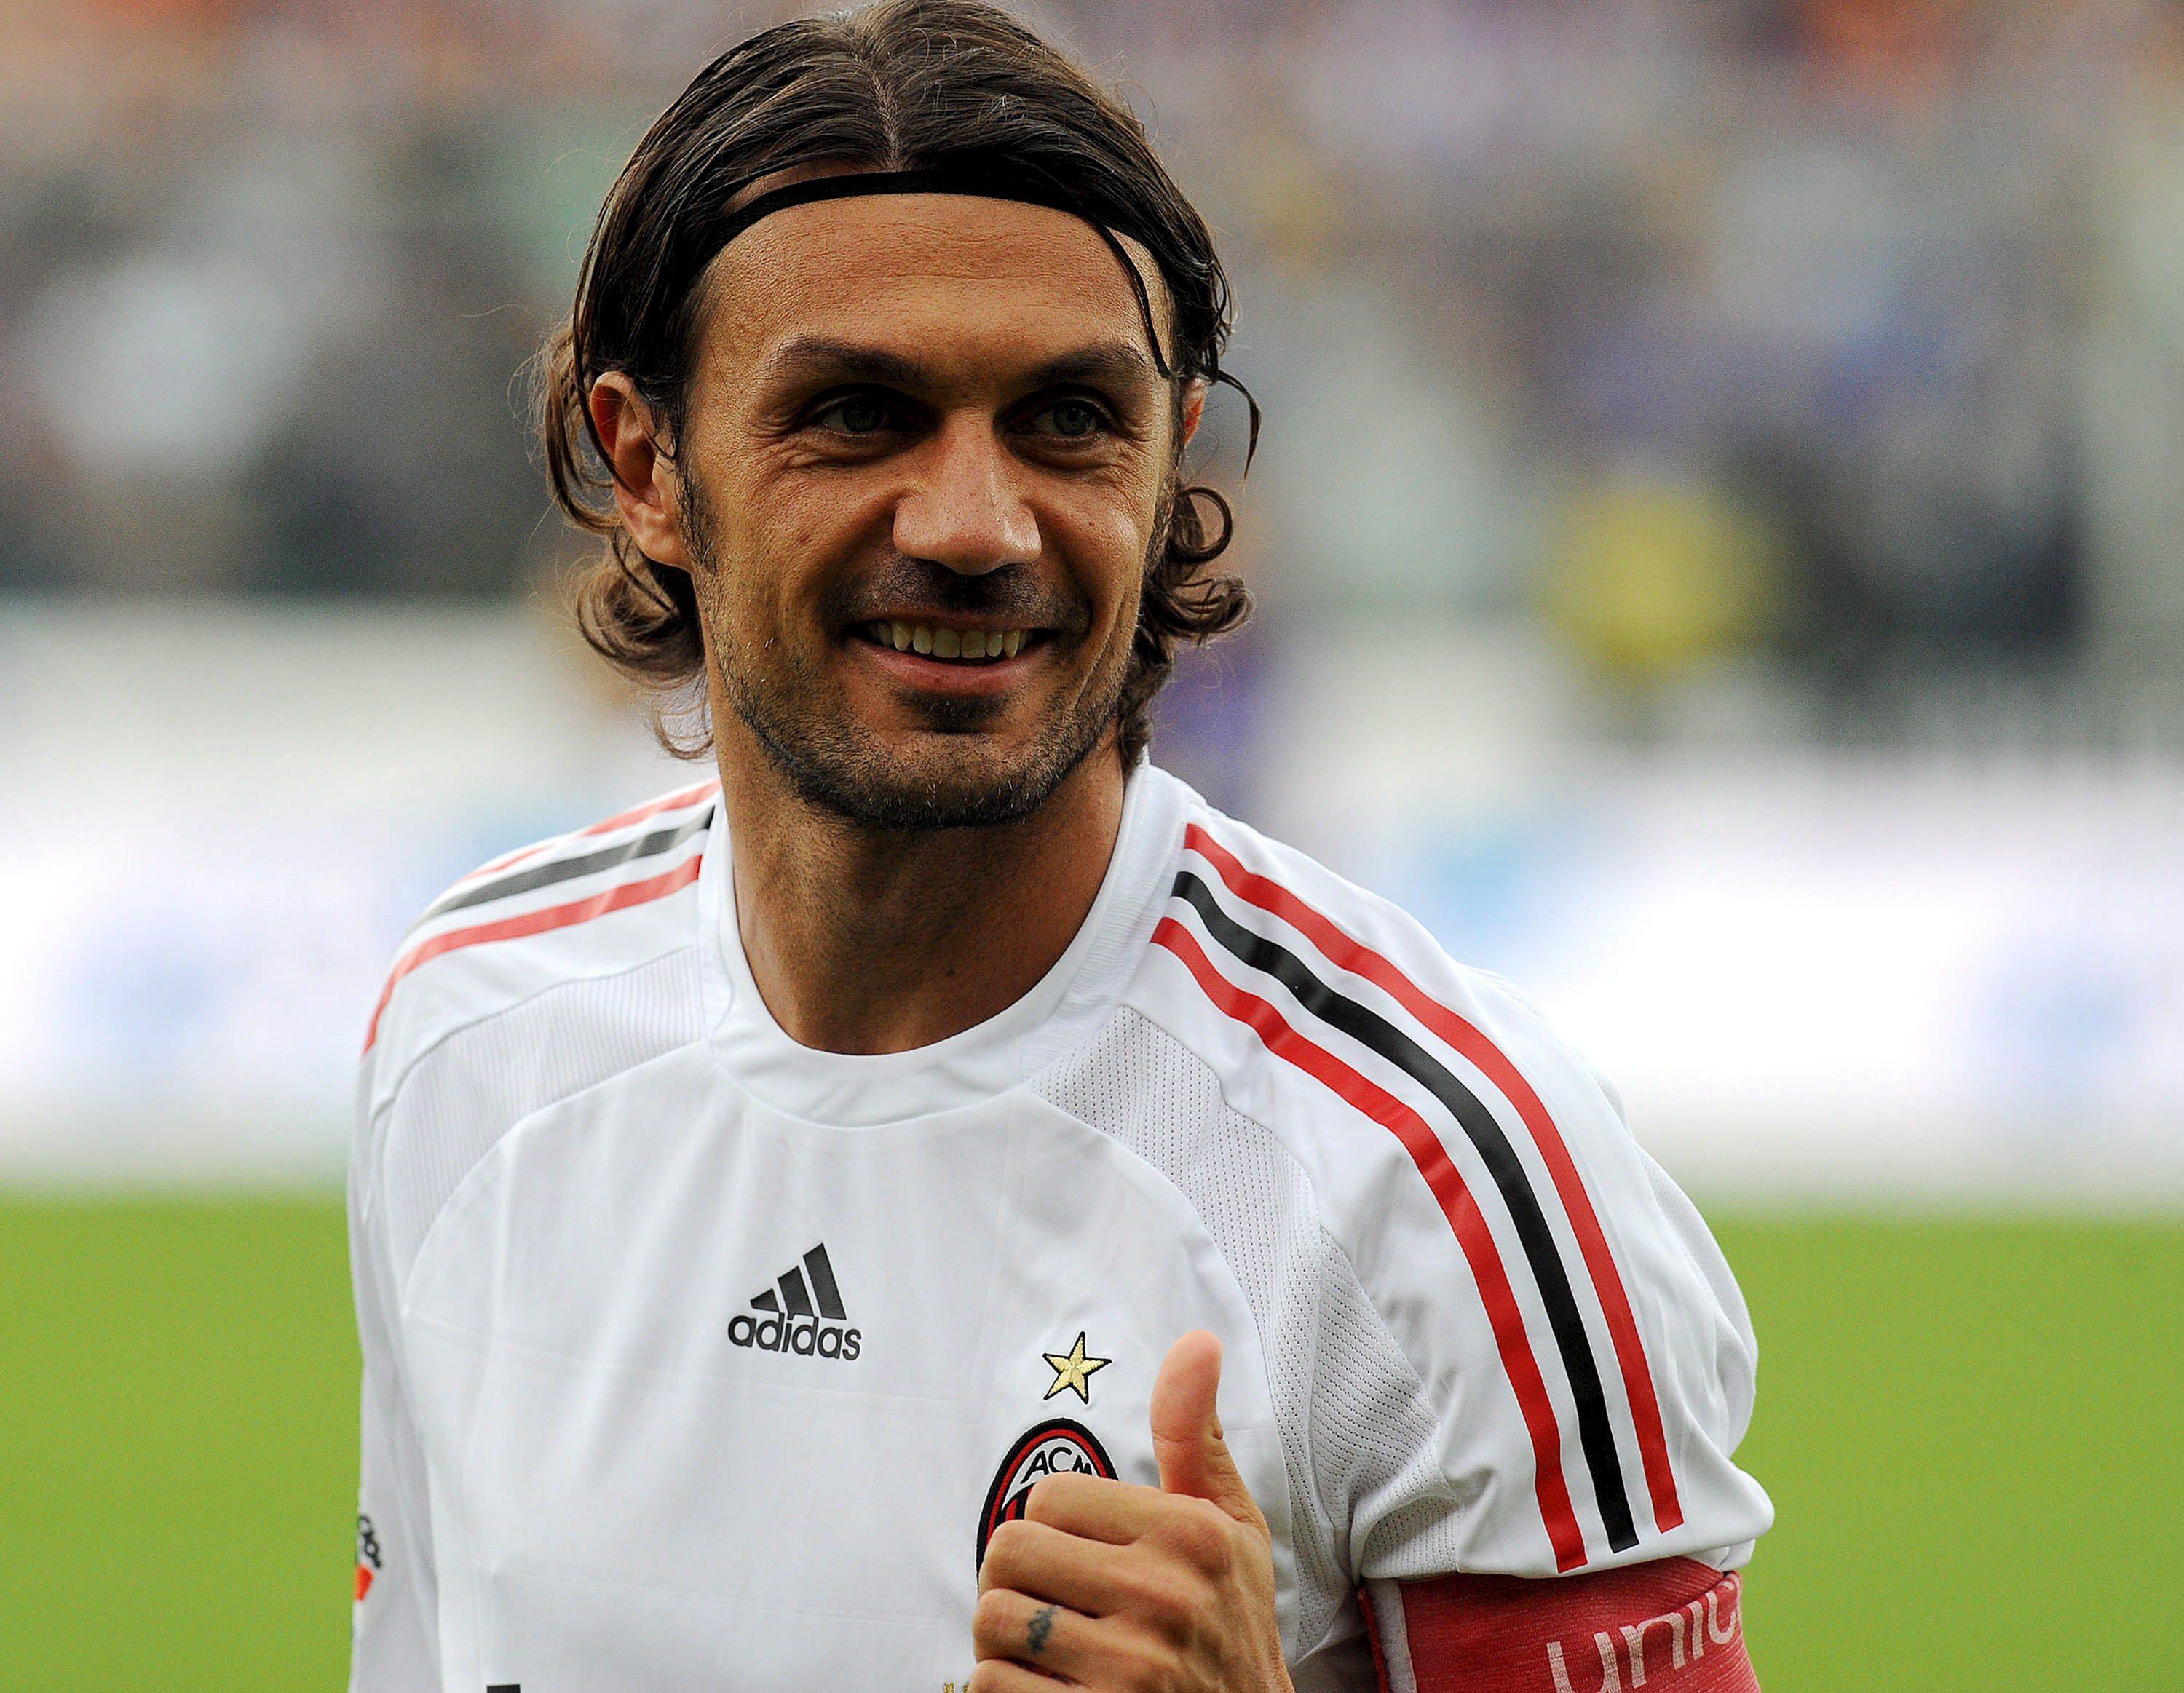 Paolo Maldini played for AC Milan for 25 years